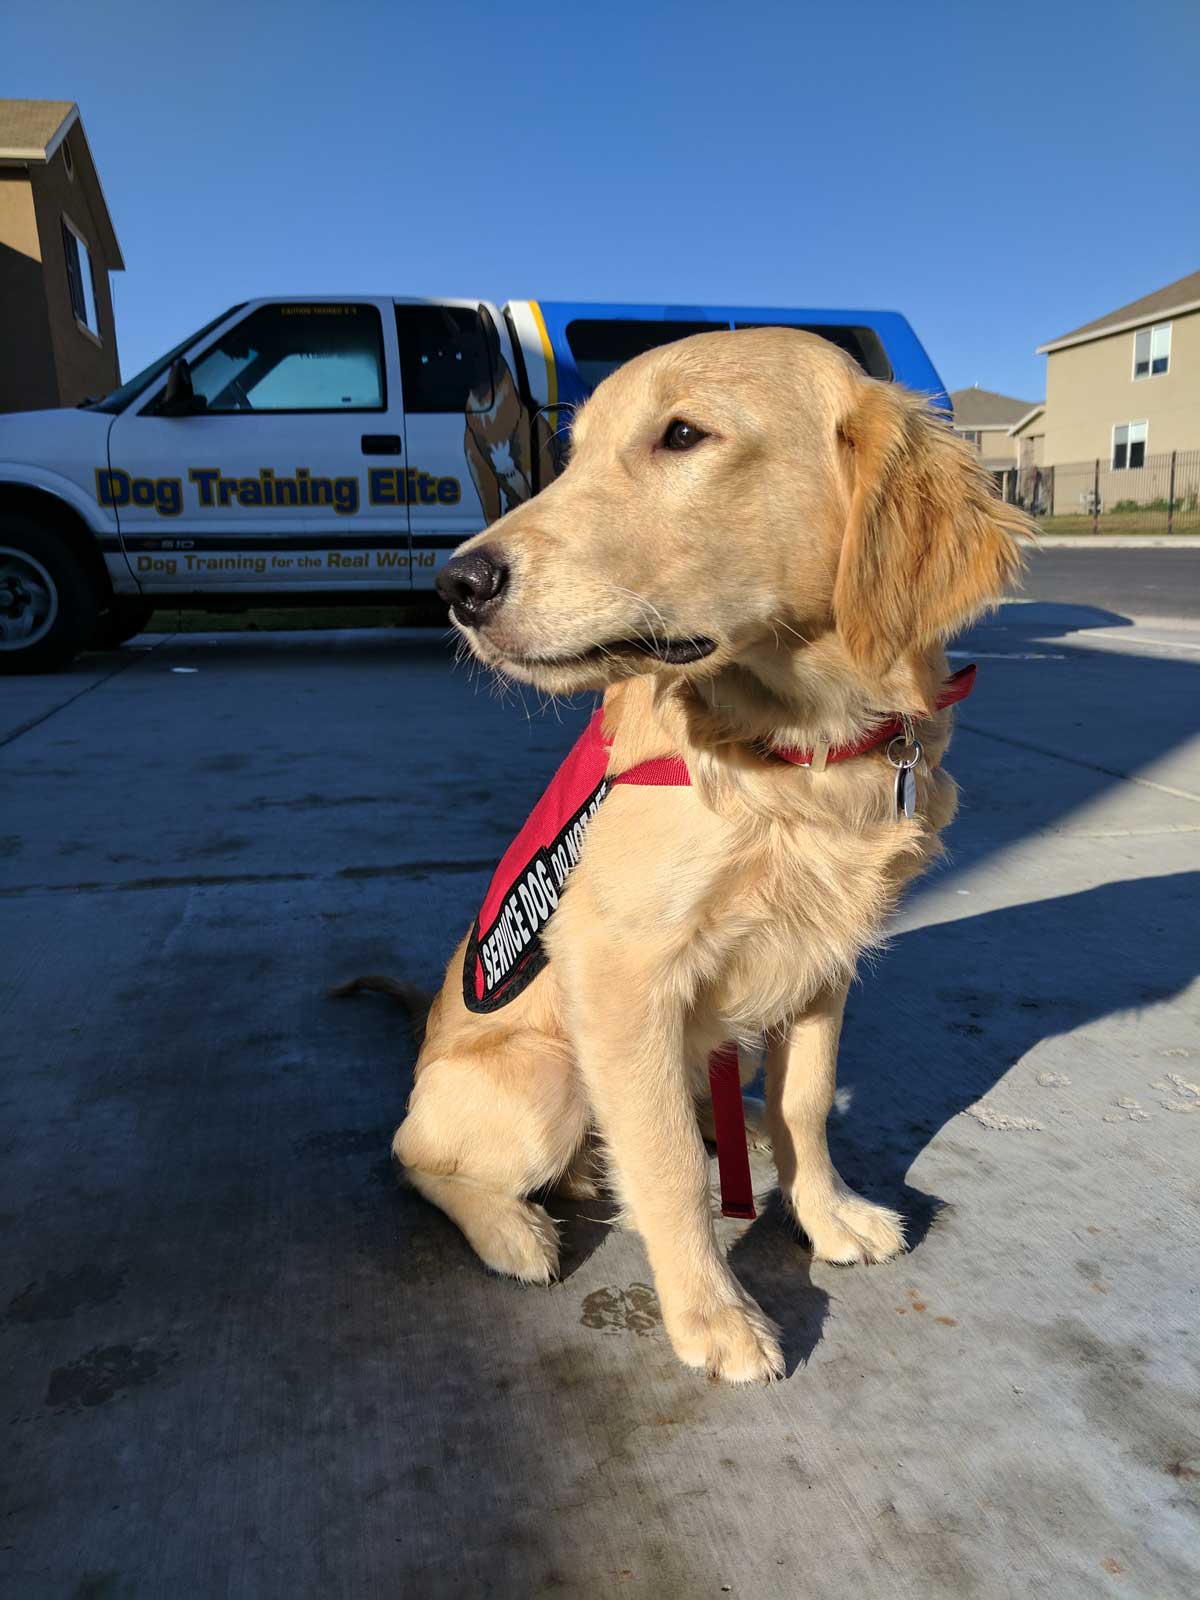 Dog Training Elite in Salt Lake City is proud to have the highest rated service dog training programs near you in Salt Lake City.